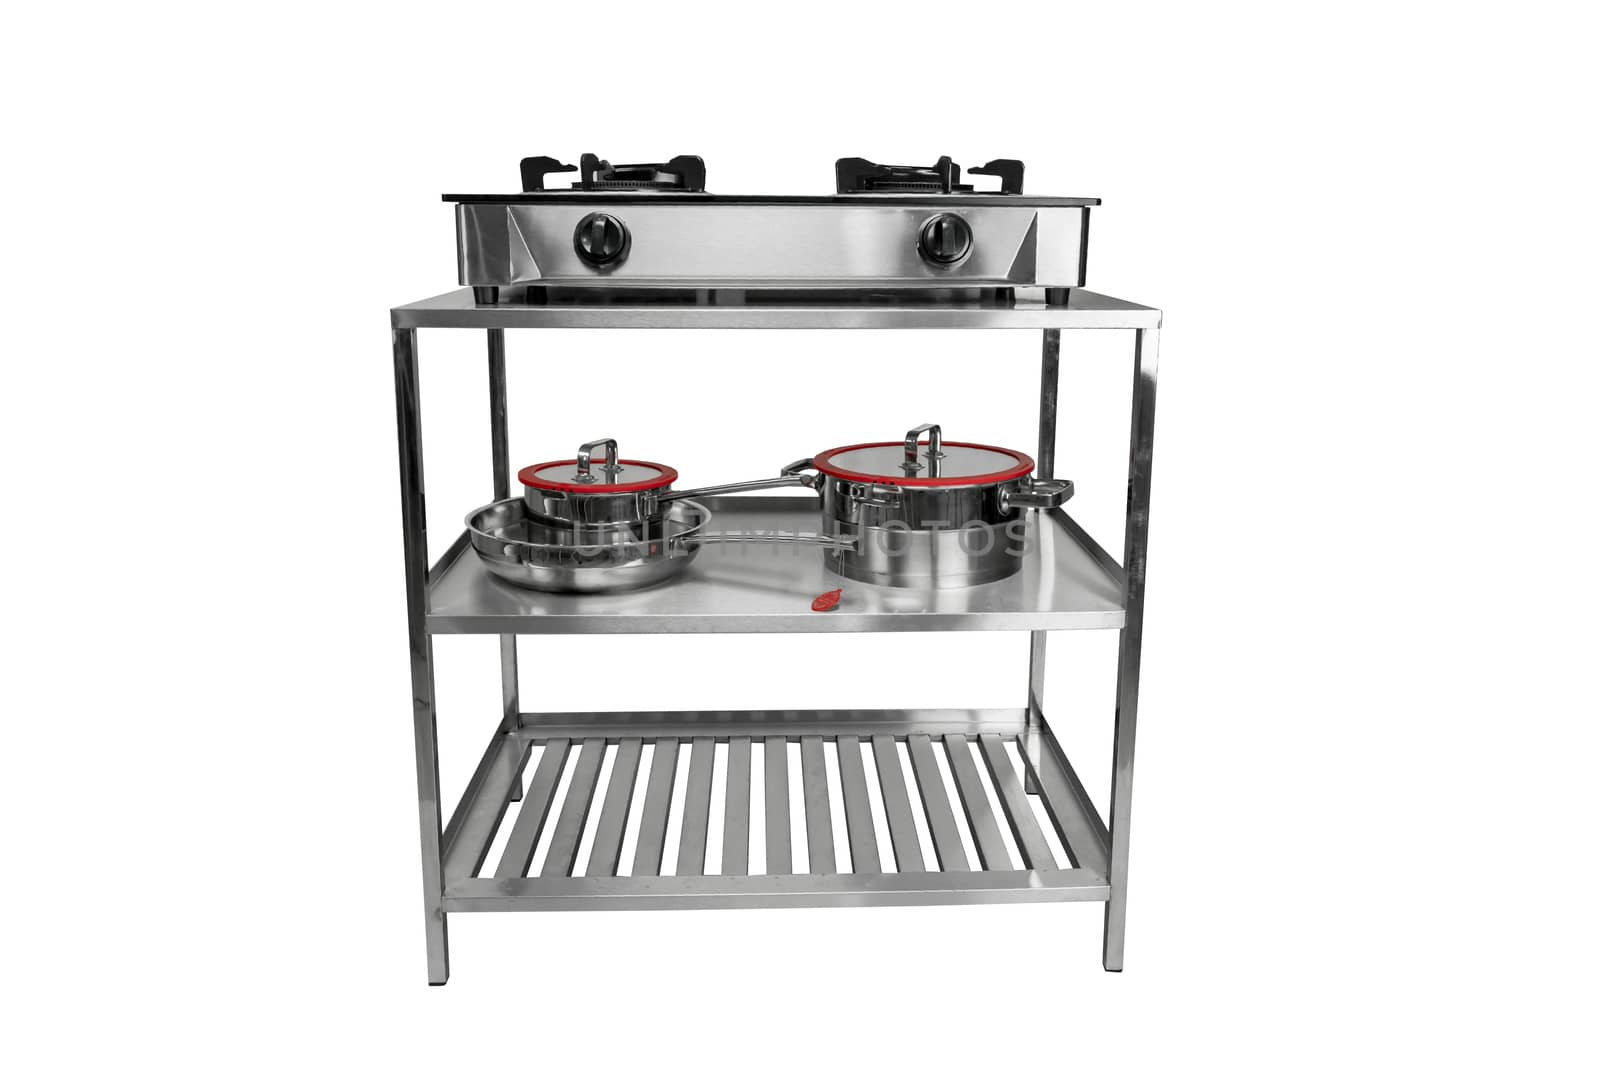 Blurred Gas stove on table of stainless on isolated white background.